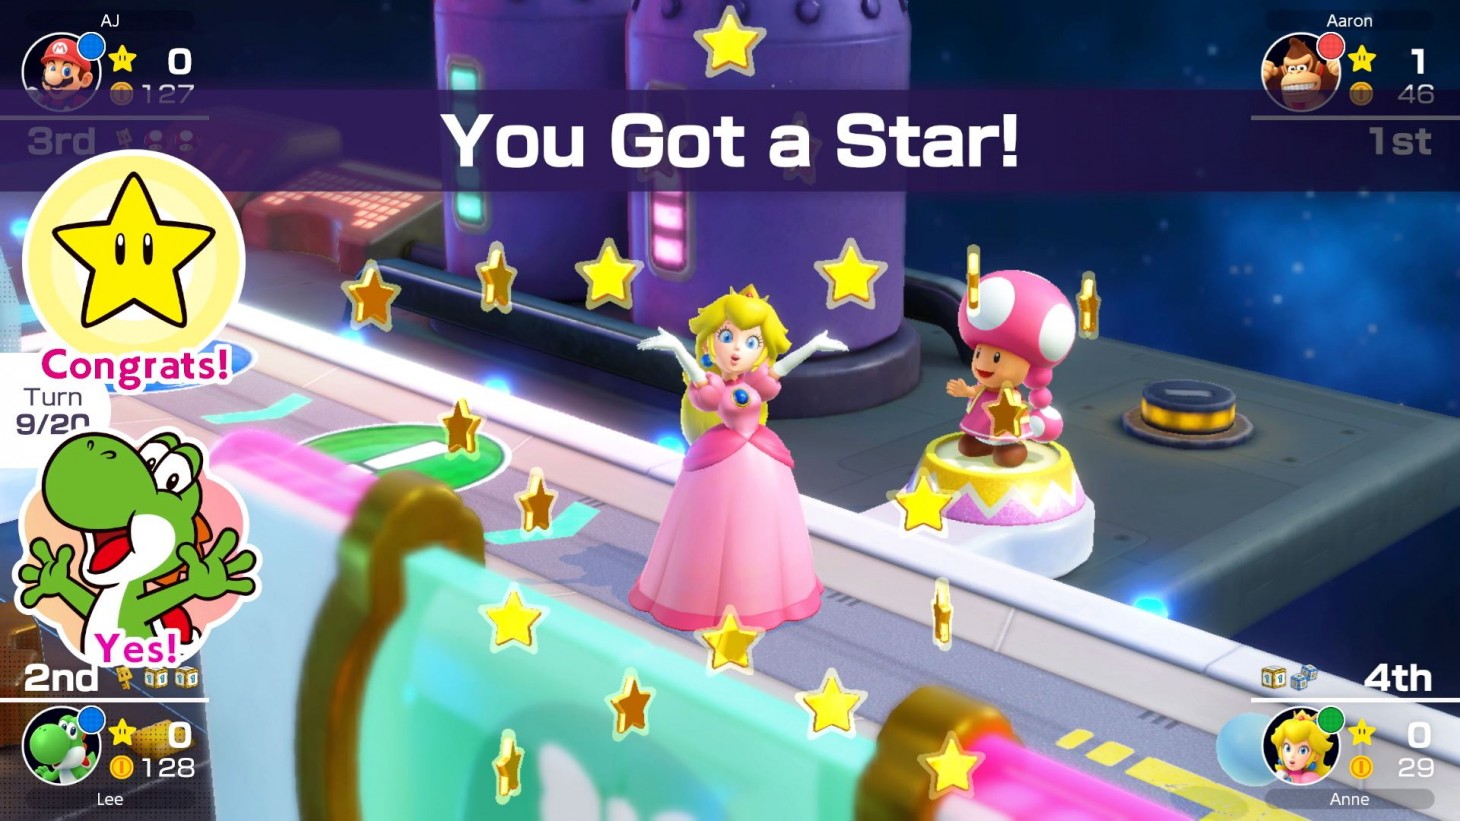 How to Play Online - All Online Modes - Mario Party Superstars Guide - IGN